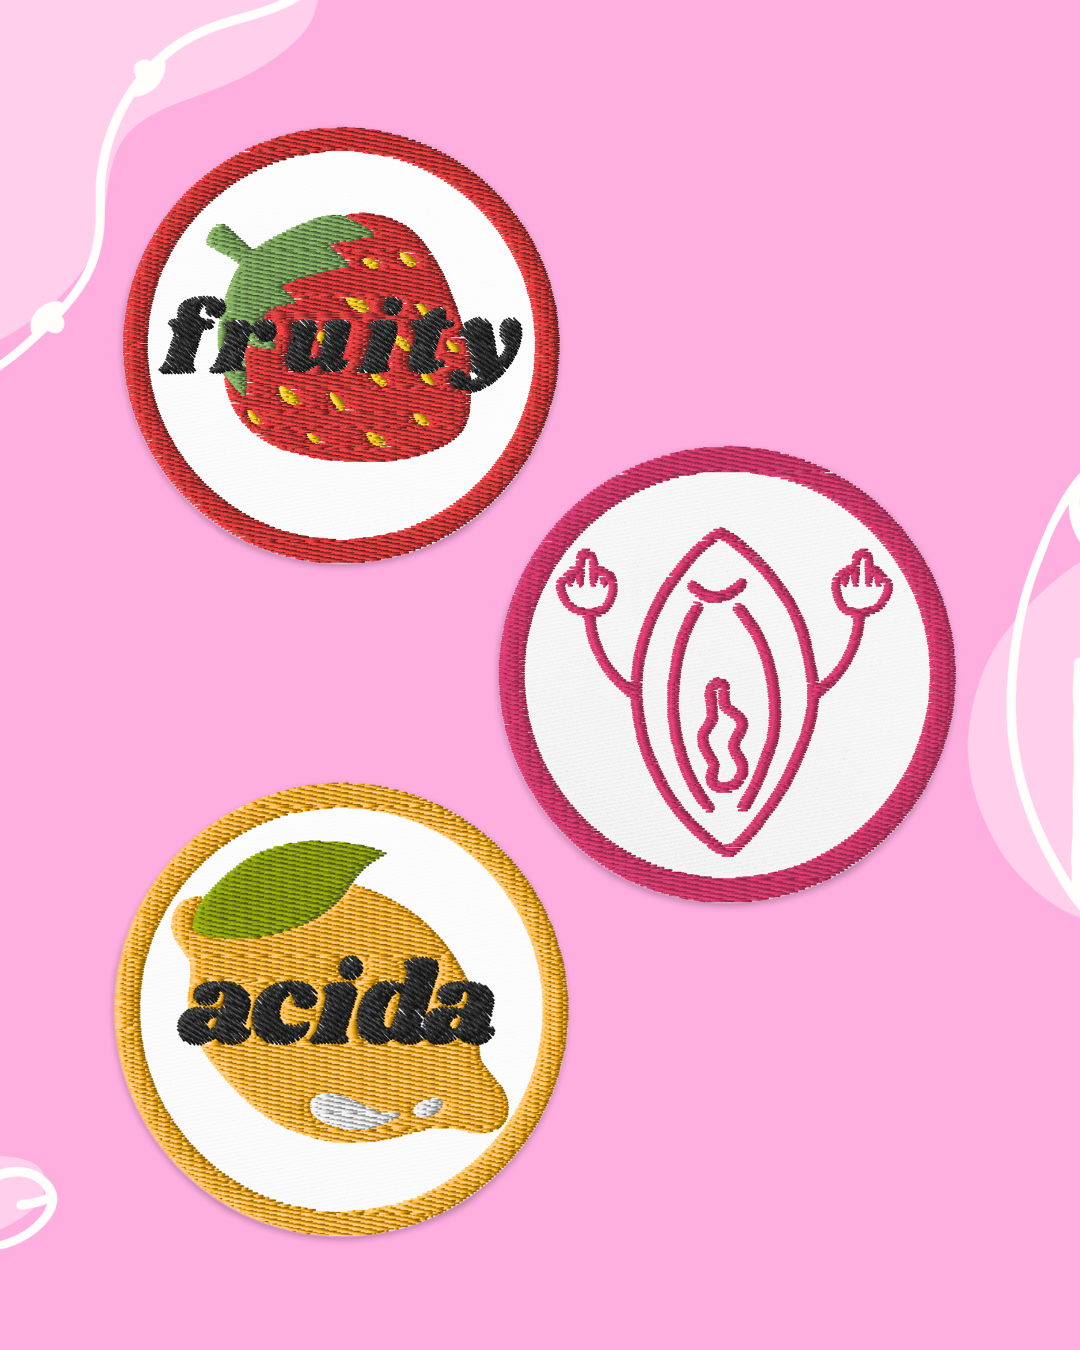 Embroidered Patches - acida, fruity, fuck the patriarchy